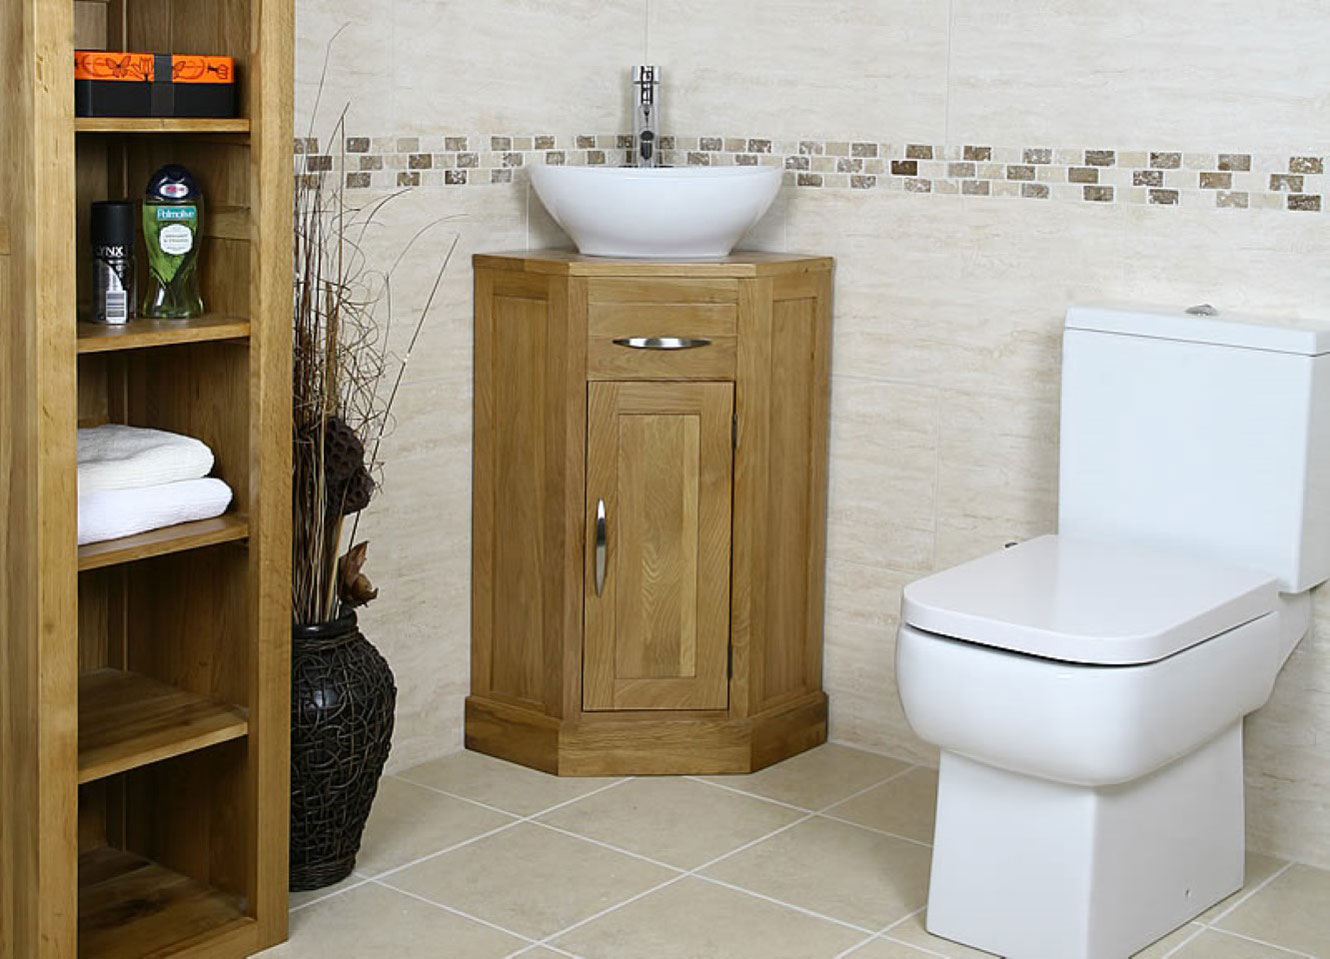 Bathroom Storage Wooden Fabulous Bathroom Storage Ideas With Wooden Materials Completed With Corner Vanity Sink And White Toilet Seat And Furnished With Black Jar Decorations Bathroom Storage Ideas For Your Comfortable Bathroom